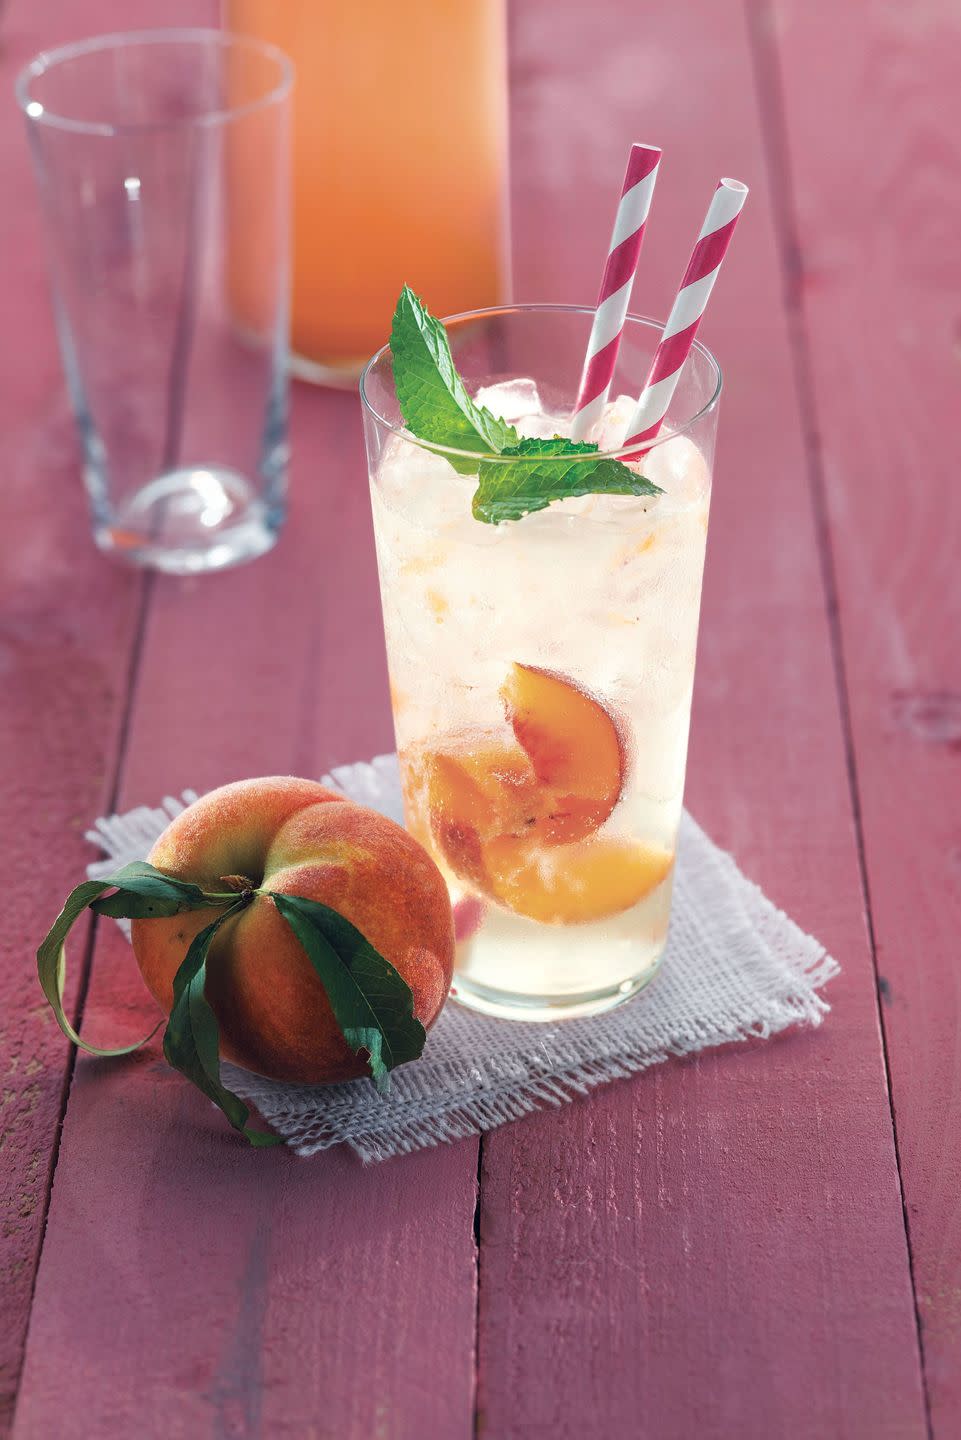 ginger peach soda in a glass with ice peach slices and fresh mint leaves for garnish